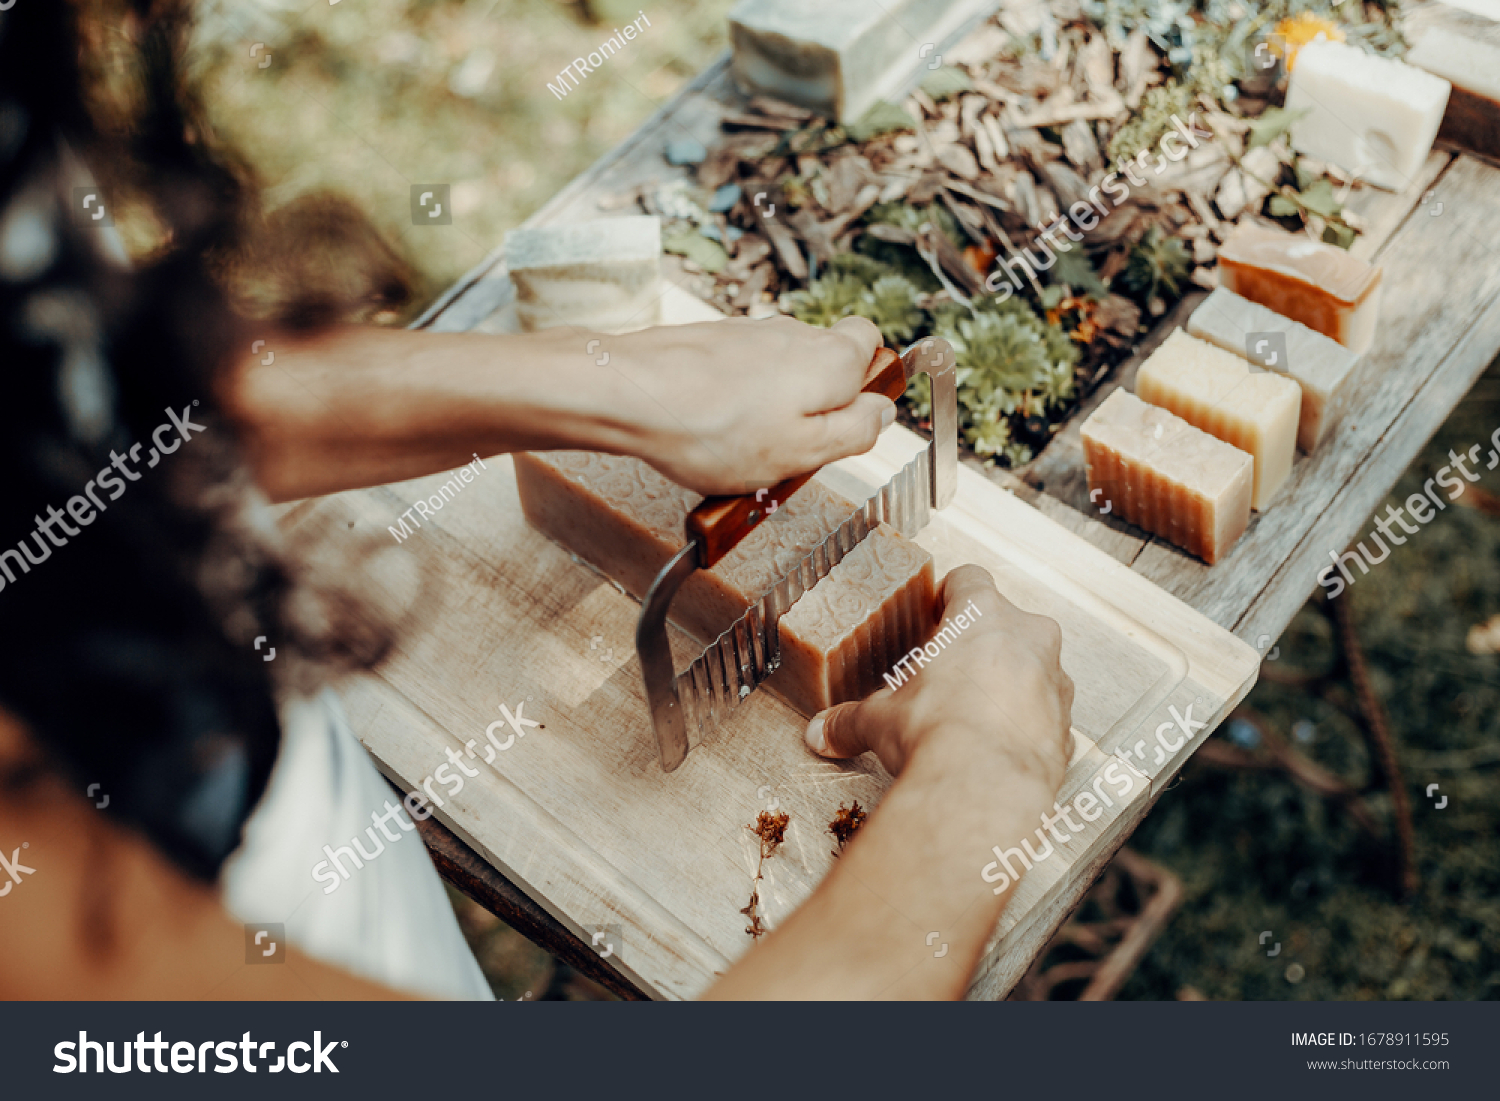 Woman is making handmade natural soaps on an old wooden table #1678911595